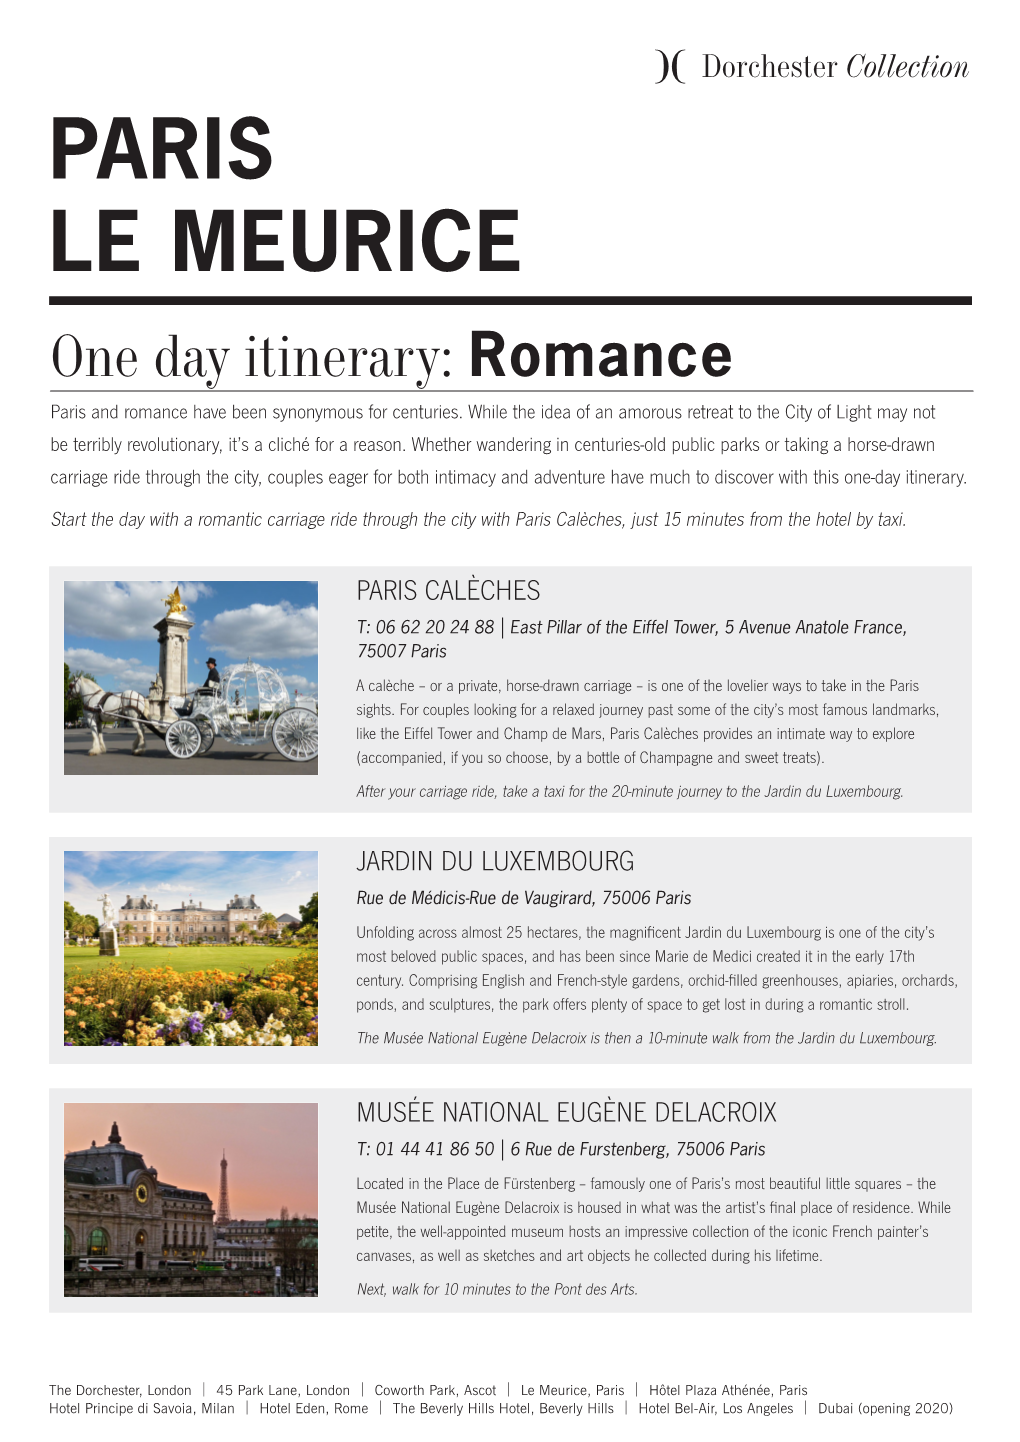 PARIS LE MEURICE One Day Itinerary: Romance Paris and Romance Have Been Synonymous for Centuries